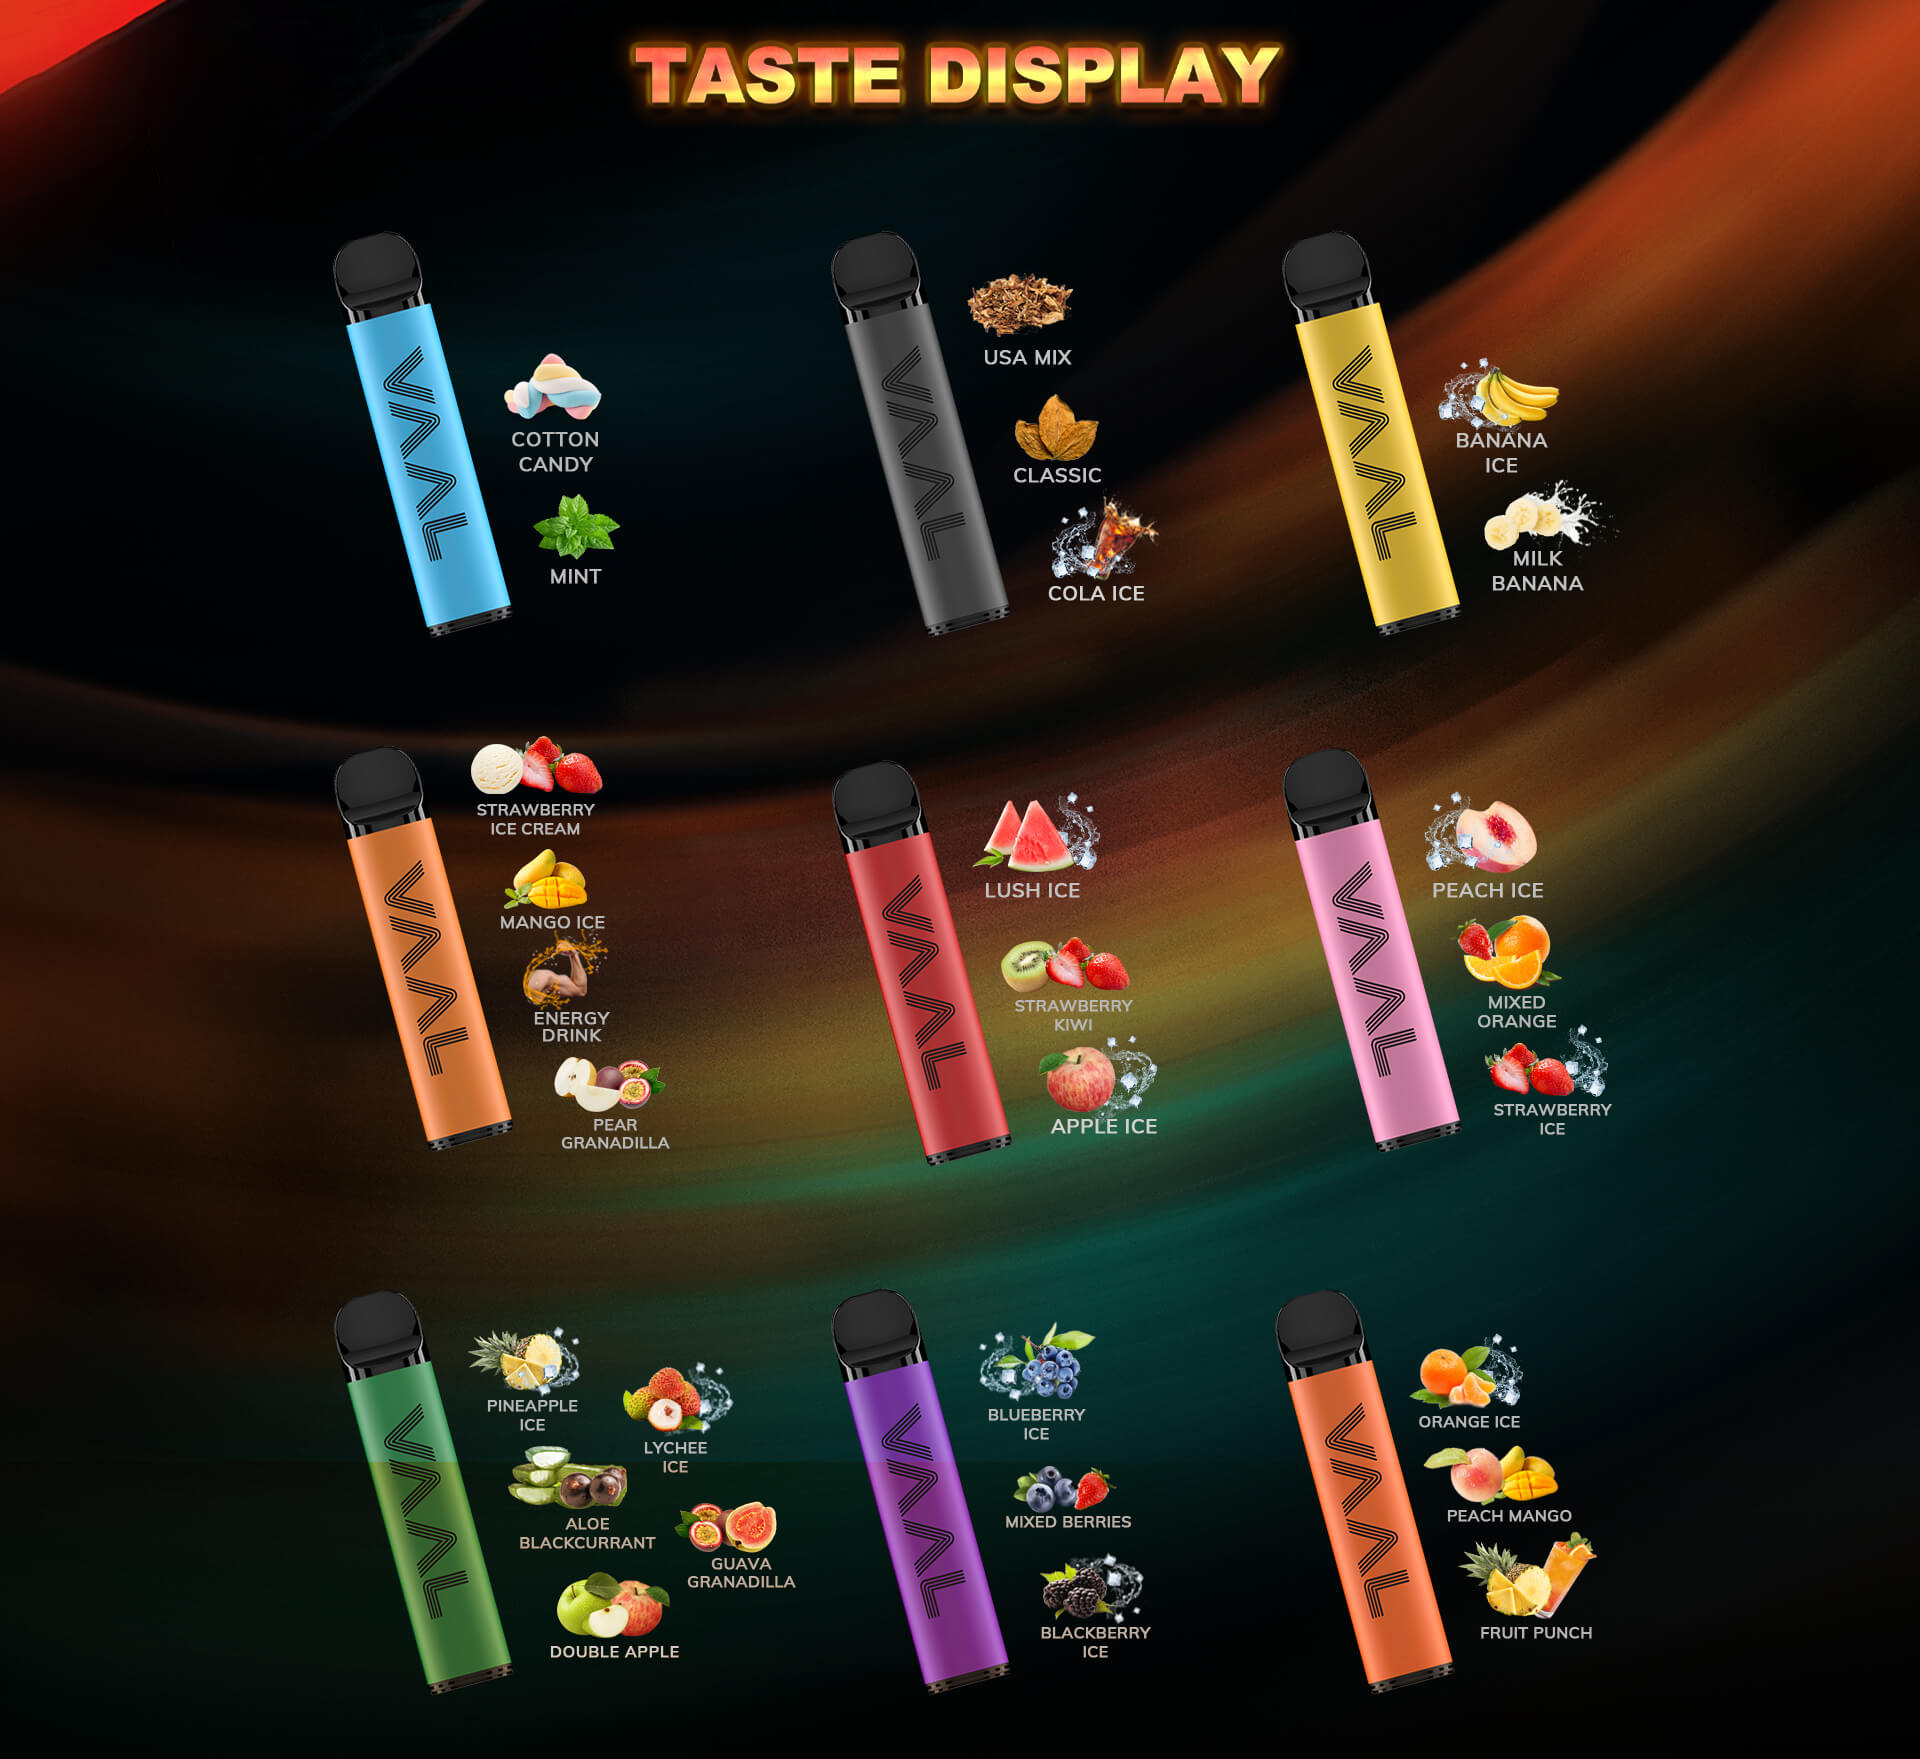 The VAAL Max has a variety of selective flavors including USA Mix, Classic, Mint, Lush Ice, Blueberry Ice, Mango Ice, Peach Ice, Banana Ice, Pineapple Ice, Orange Ice, Energy Drink, Cola Ice, Aloe Blackcurrant, Mixed Berries, Peach Mango, Strawberry Kiwi, Mixed Orange, Strawberry Ice Cream, Cotton Candy, Milk Banana, Double Apple, Strawberry Ice, Lychee Ice, Guava Granadilla, Fruit Punch, Blackberry Ice, Apple Ice, Pear Granadilla and so on.